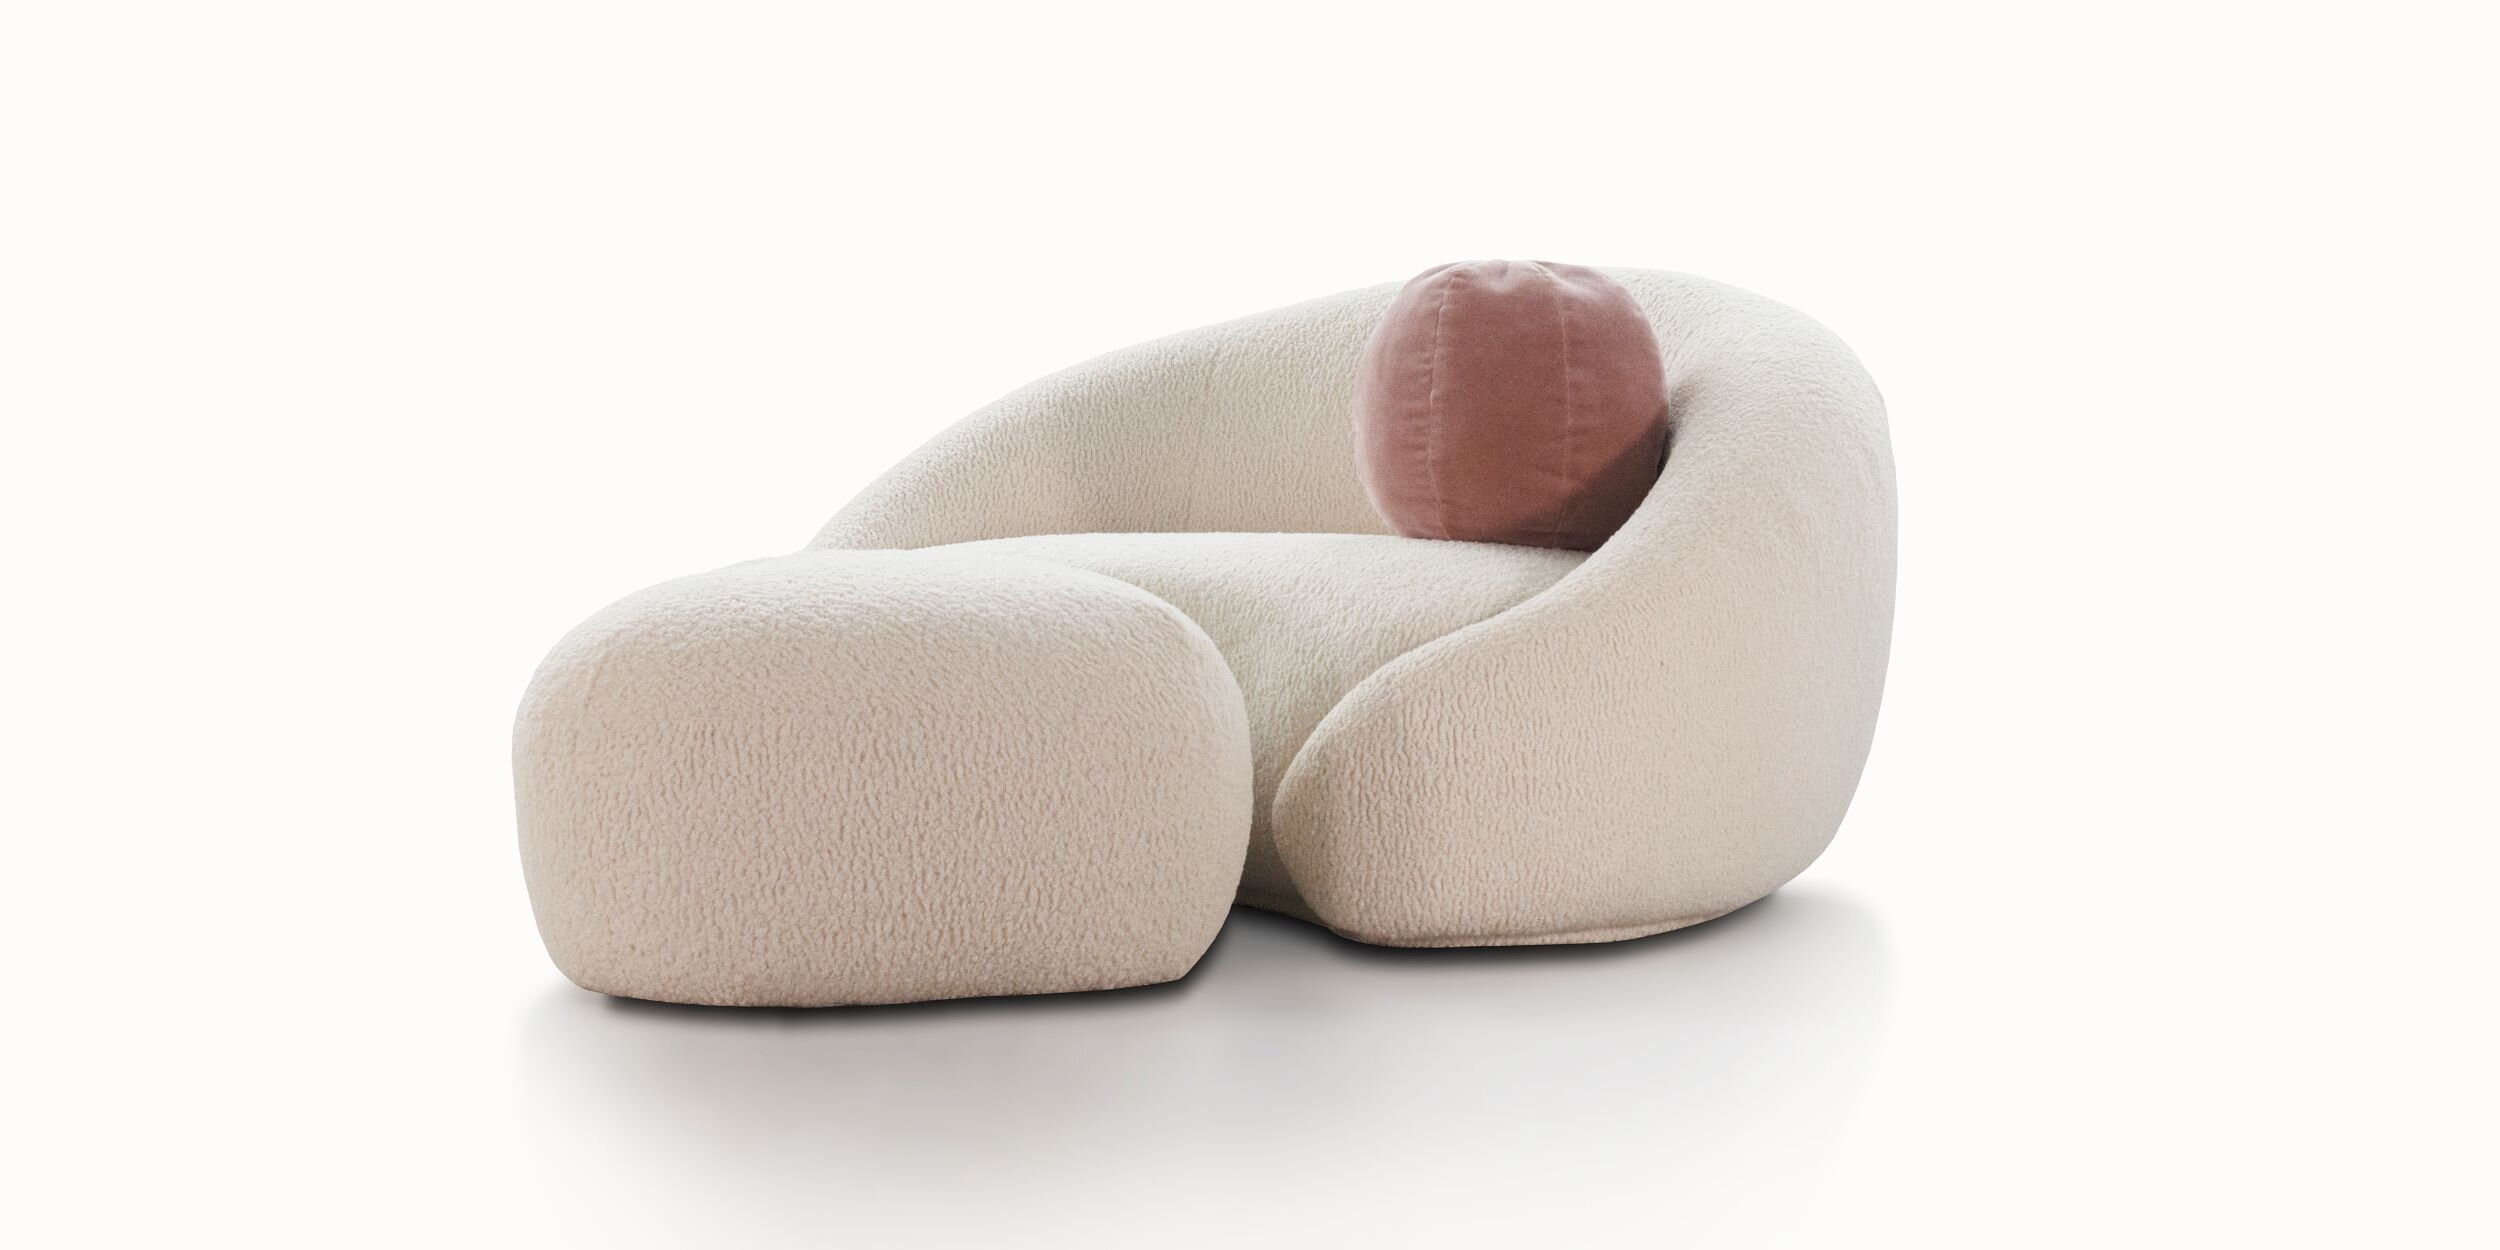 Cuddle chair and sweetheart (heart-shaped) ottoman, faux sheepskin, from the Embrace Collection, Nathan Anthony.